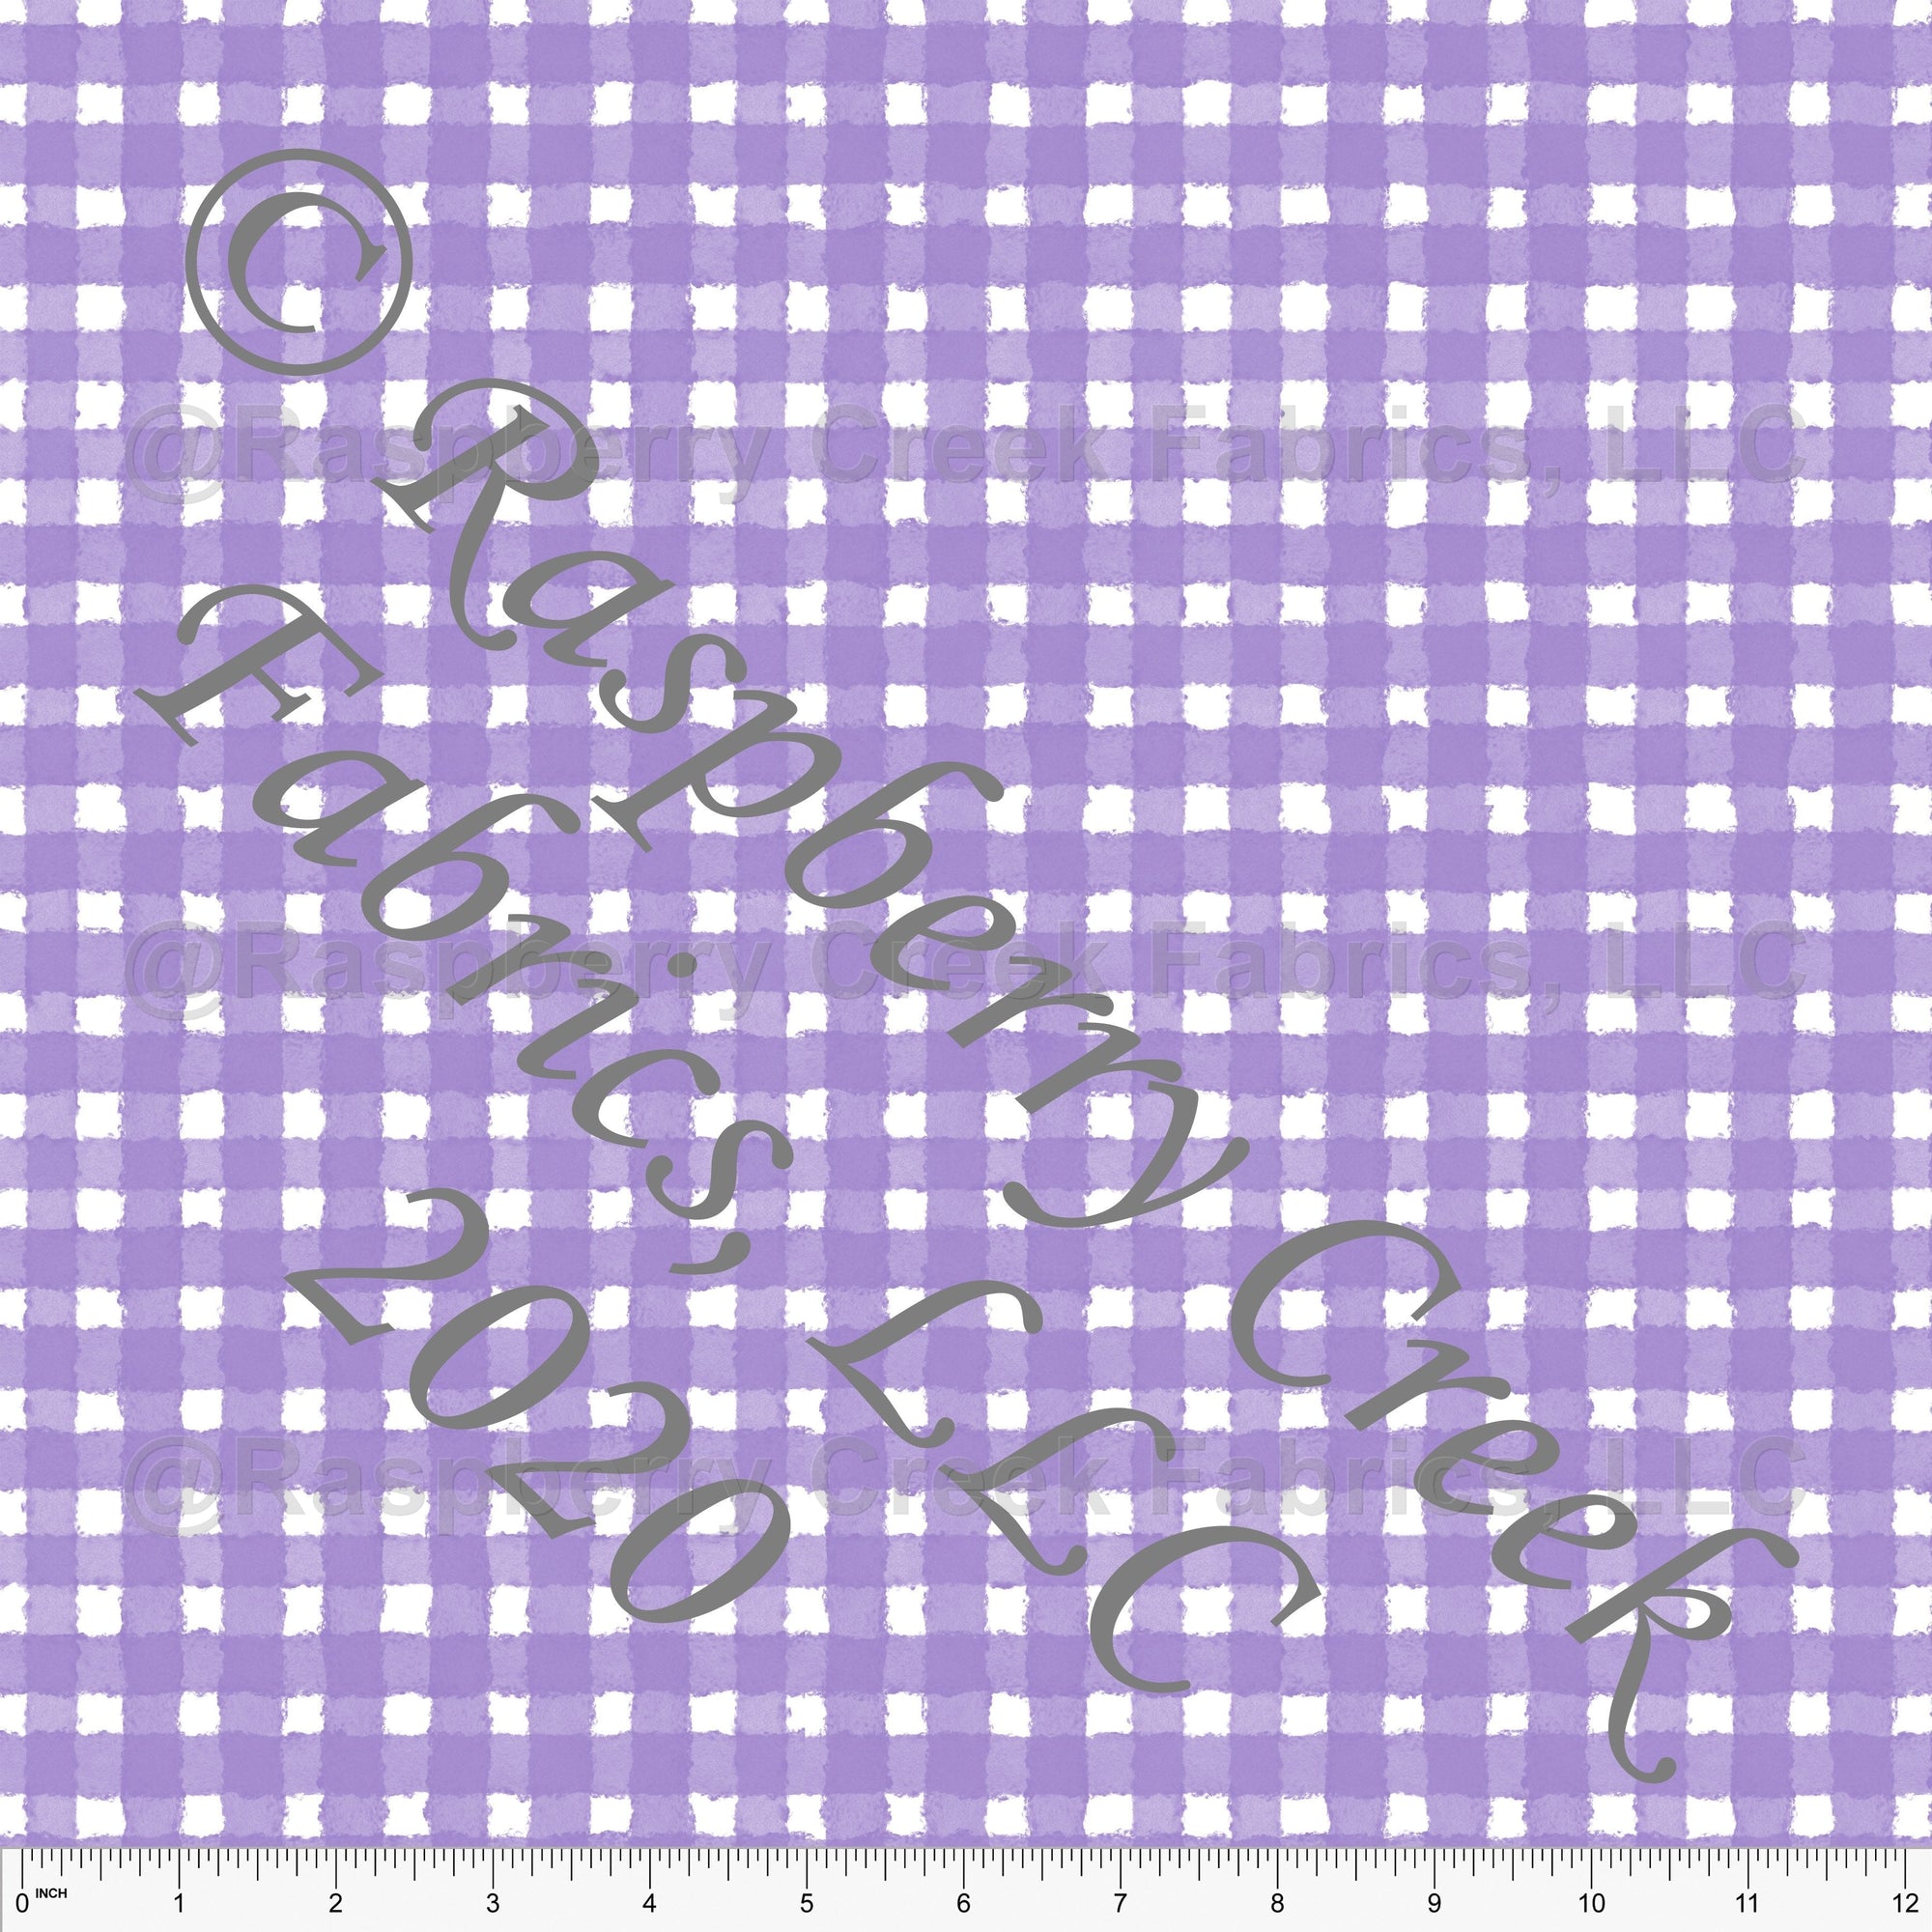 Lilac and White Painted Check Gingham, By Bri Powell for Club Fabrics Fabric, Raspberry Creek Fabrics, watermarked